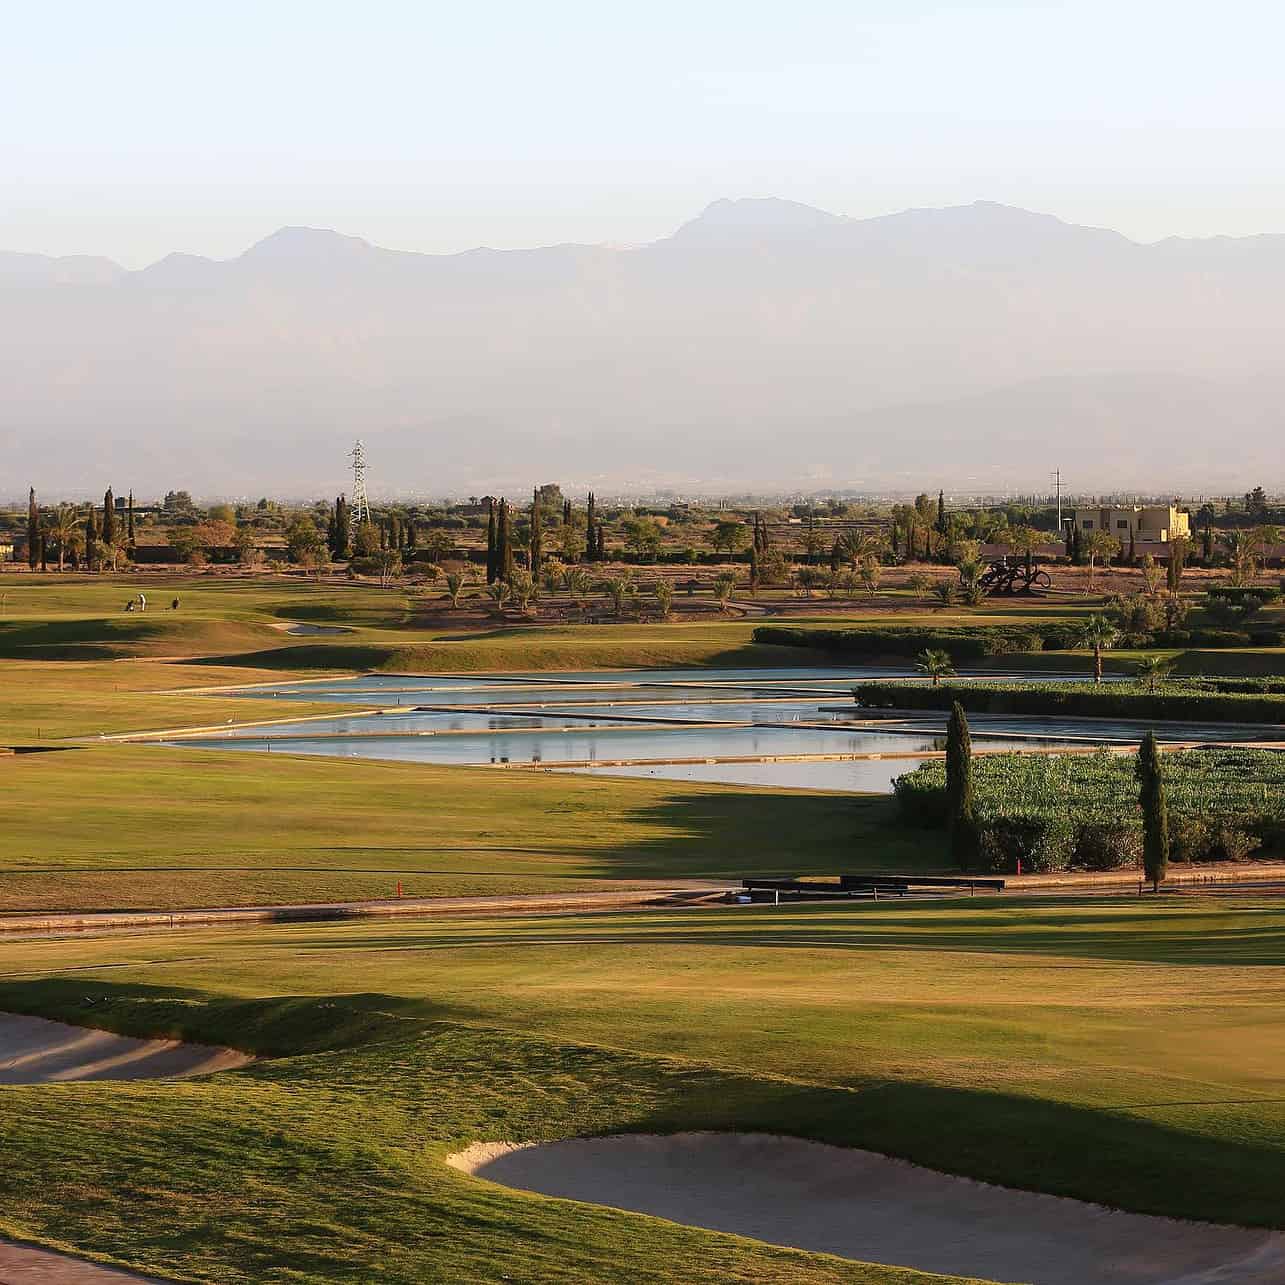 Golfing in Marrakech: When the beauty of golf meets the splendor of nature at the Al Maaden Golf Marrakech in Morocco.